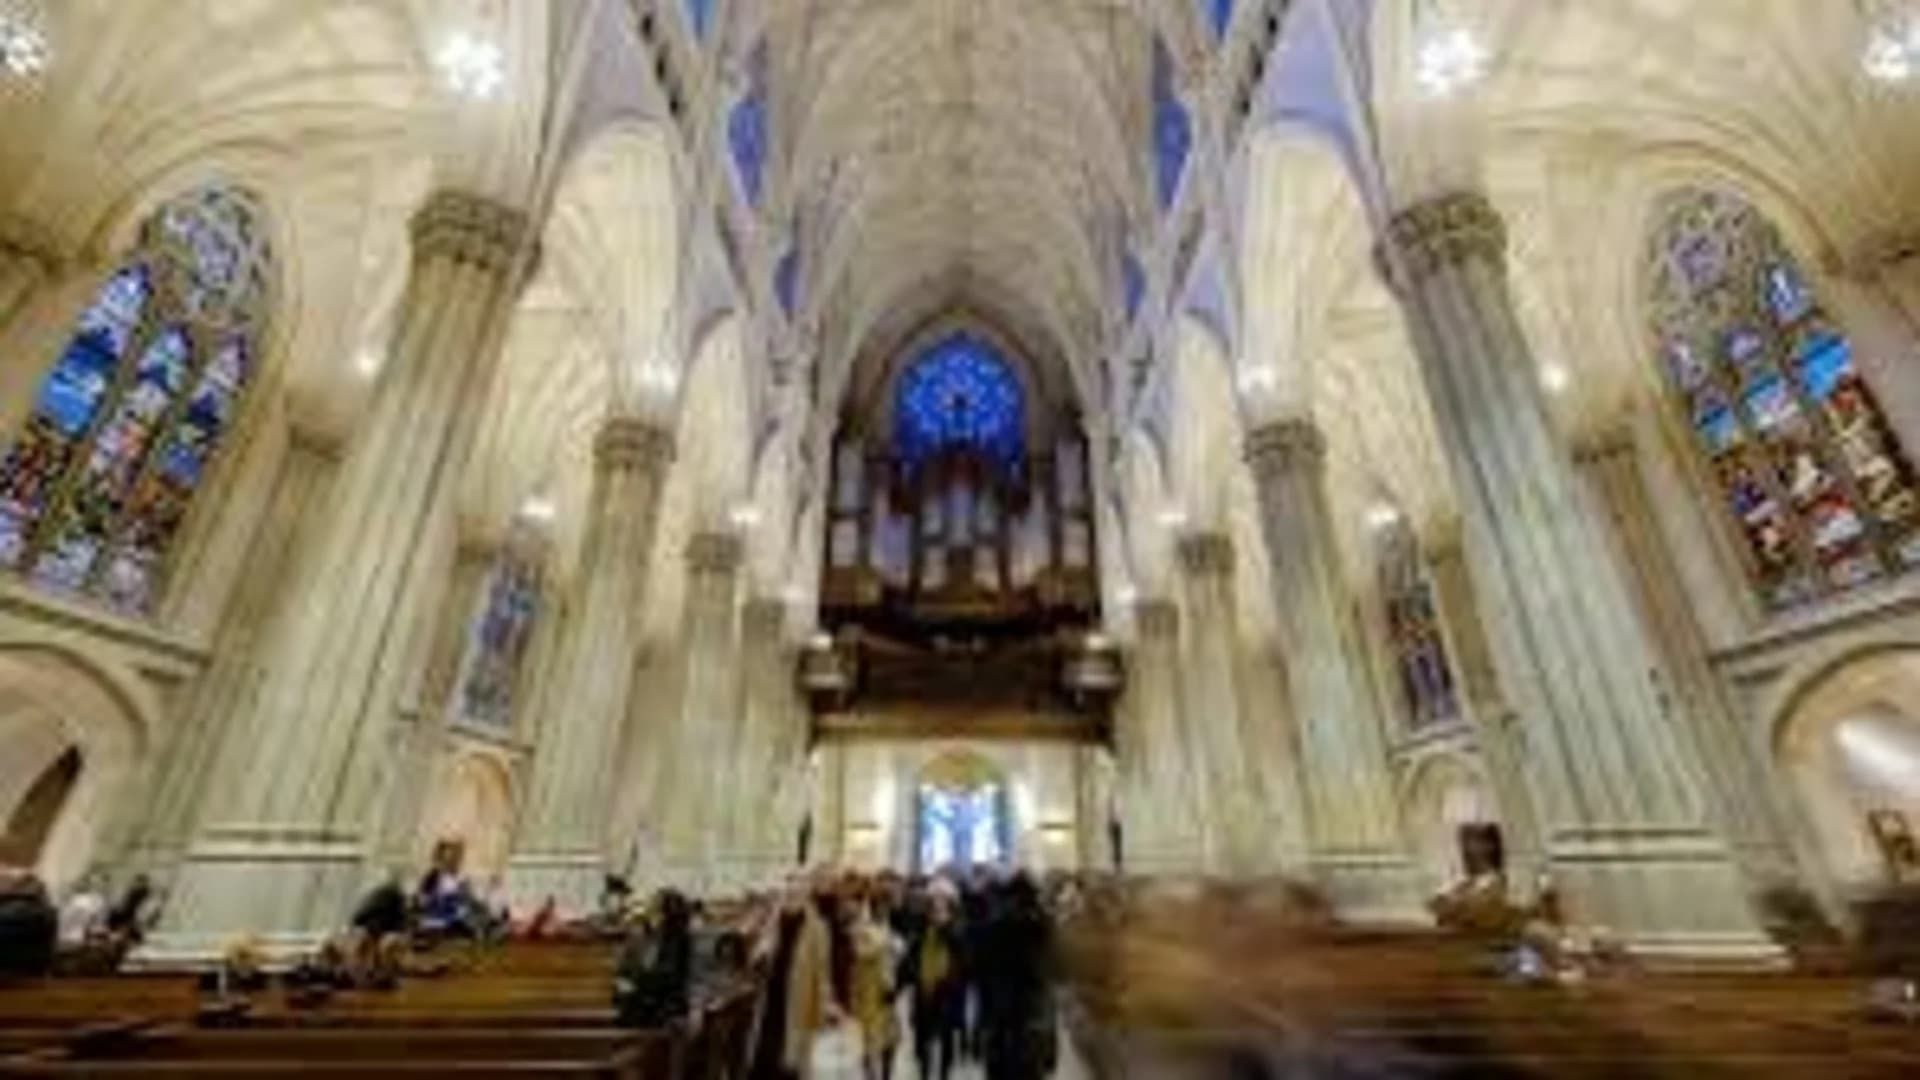 Archdiocese of New York to return to public worship with social distancing, COVID-19 tests